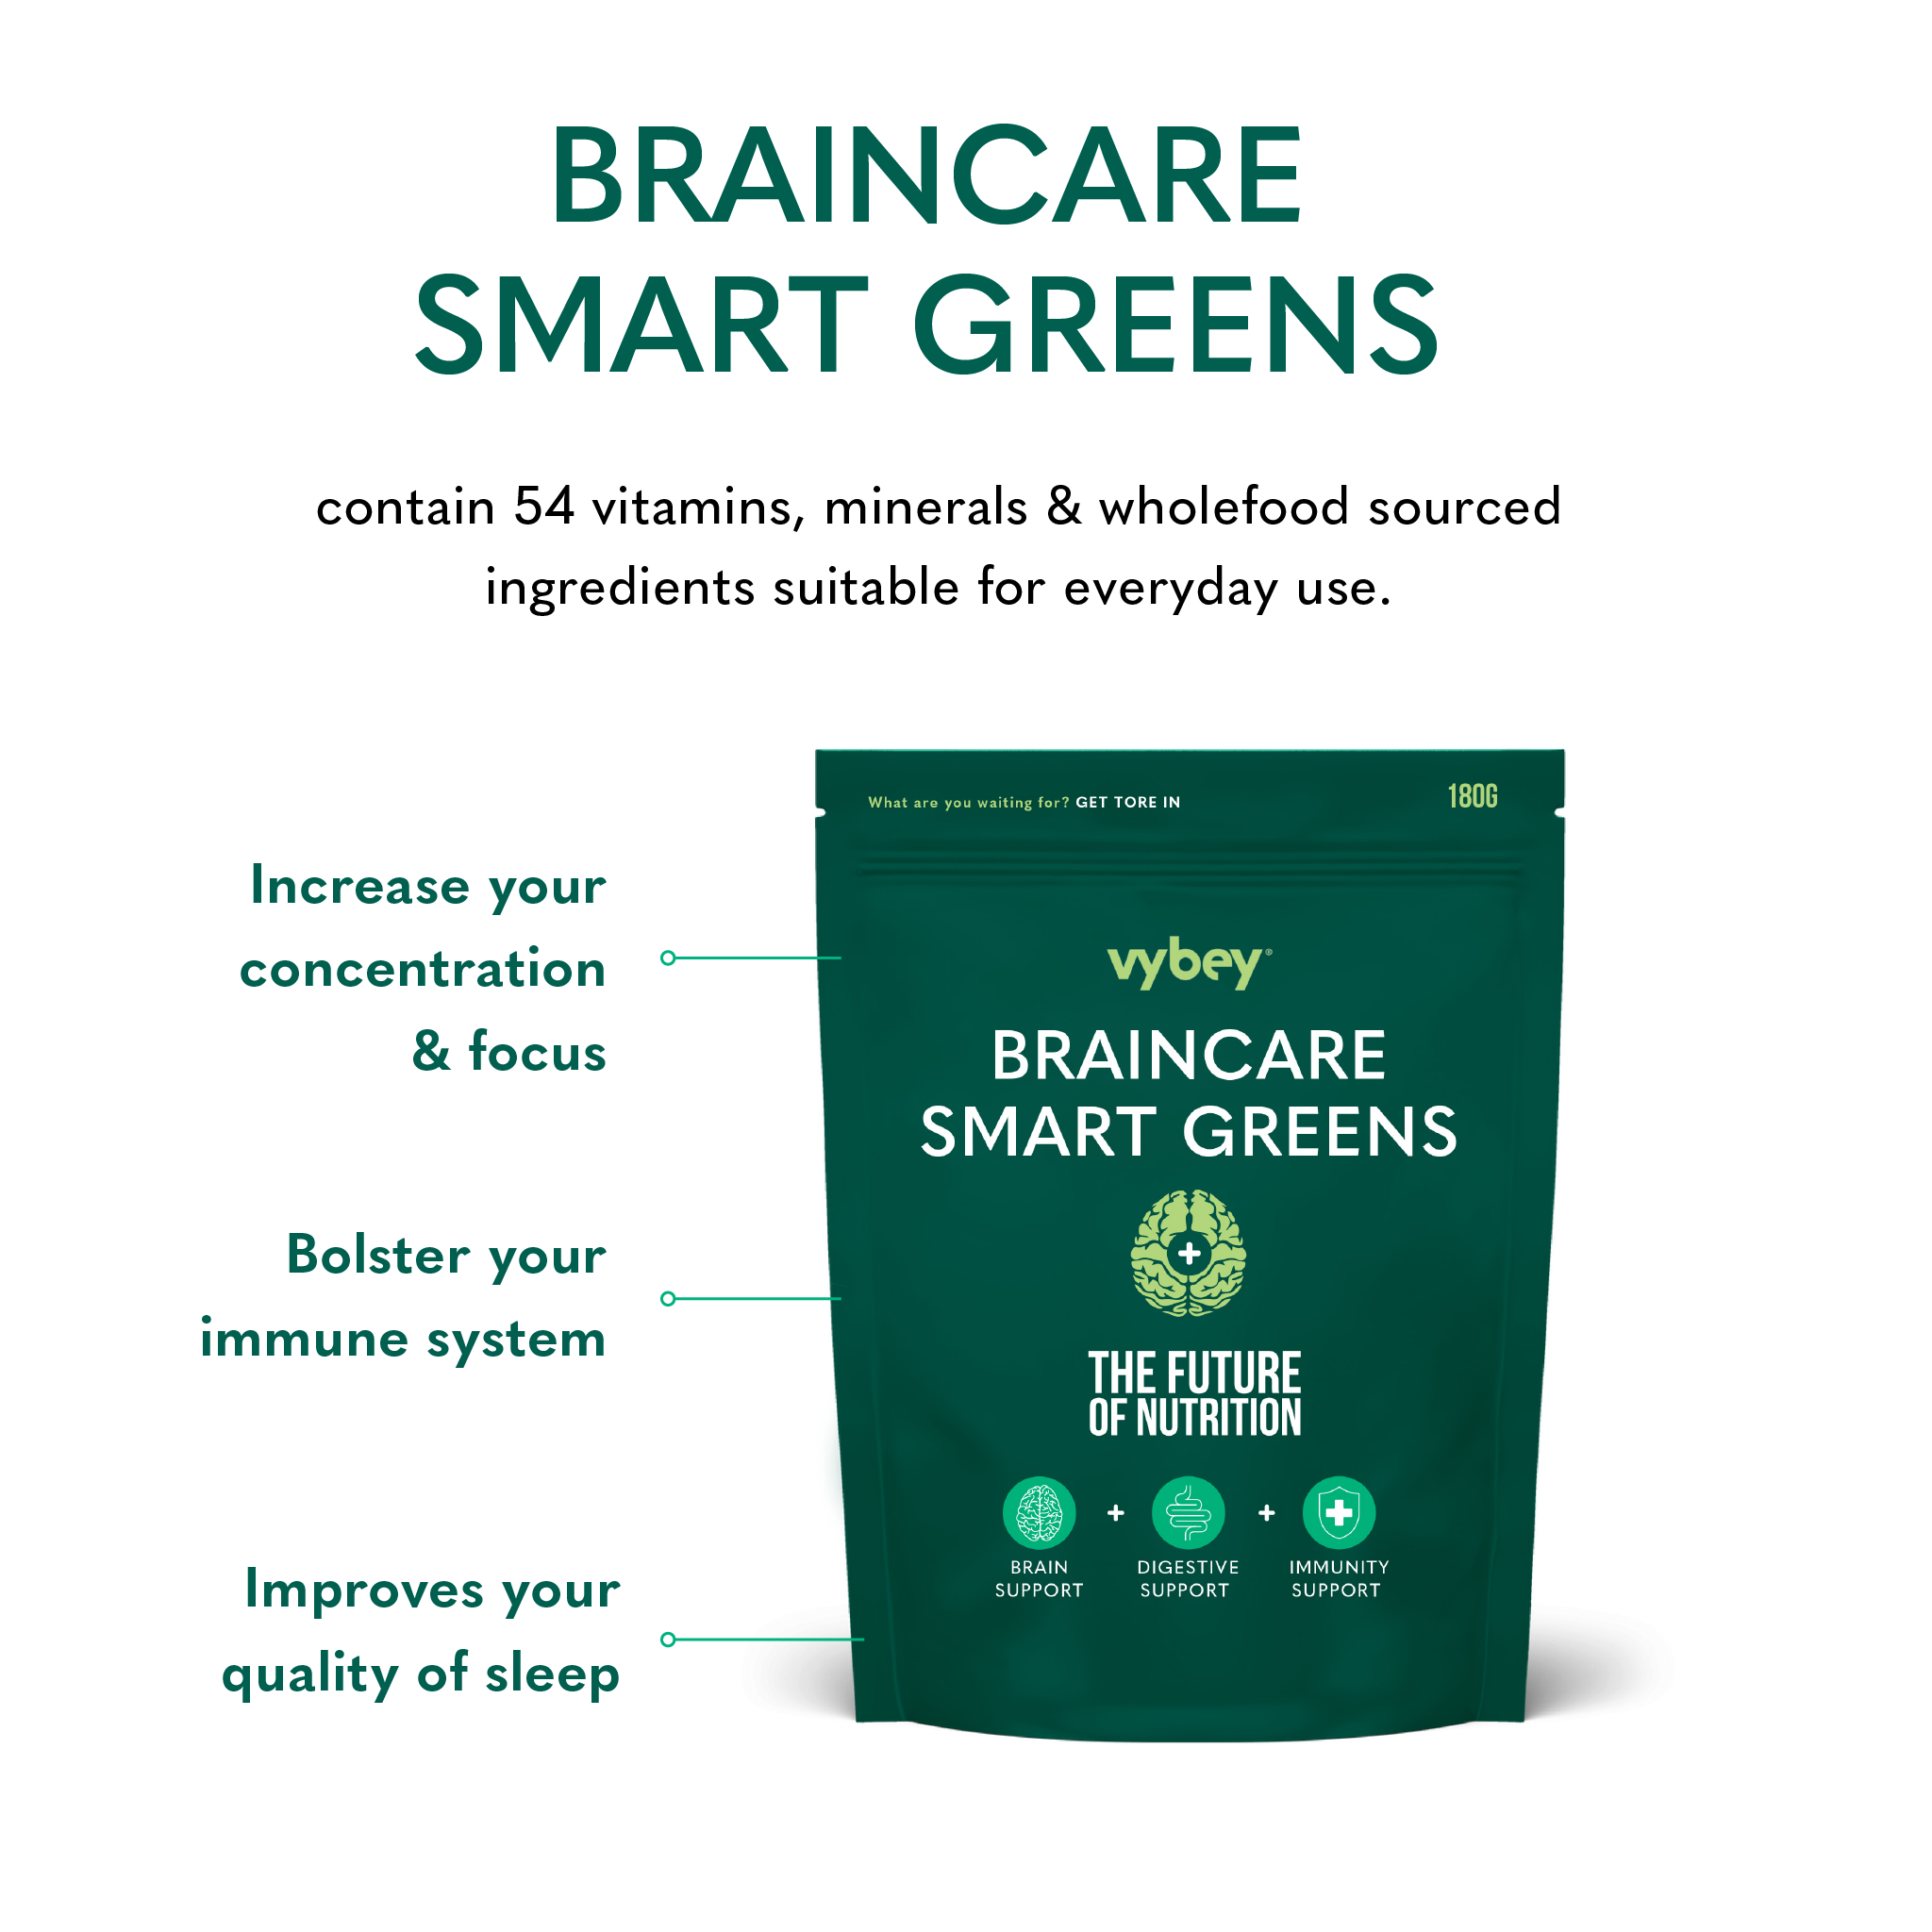 infographic showing benefit of vybey braincare smart greens